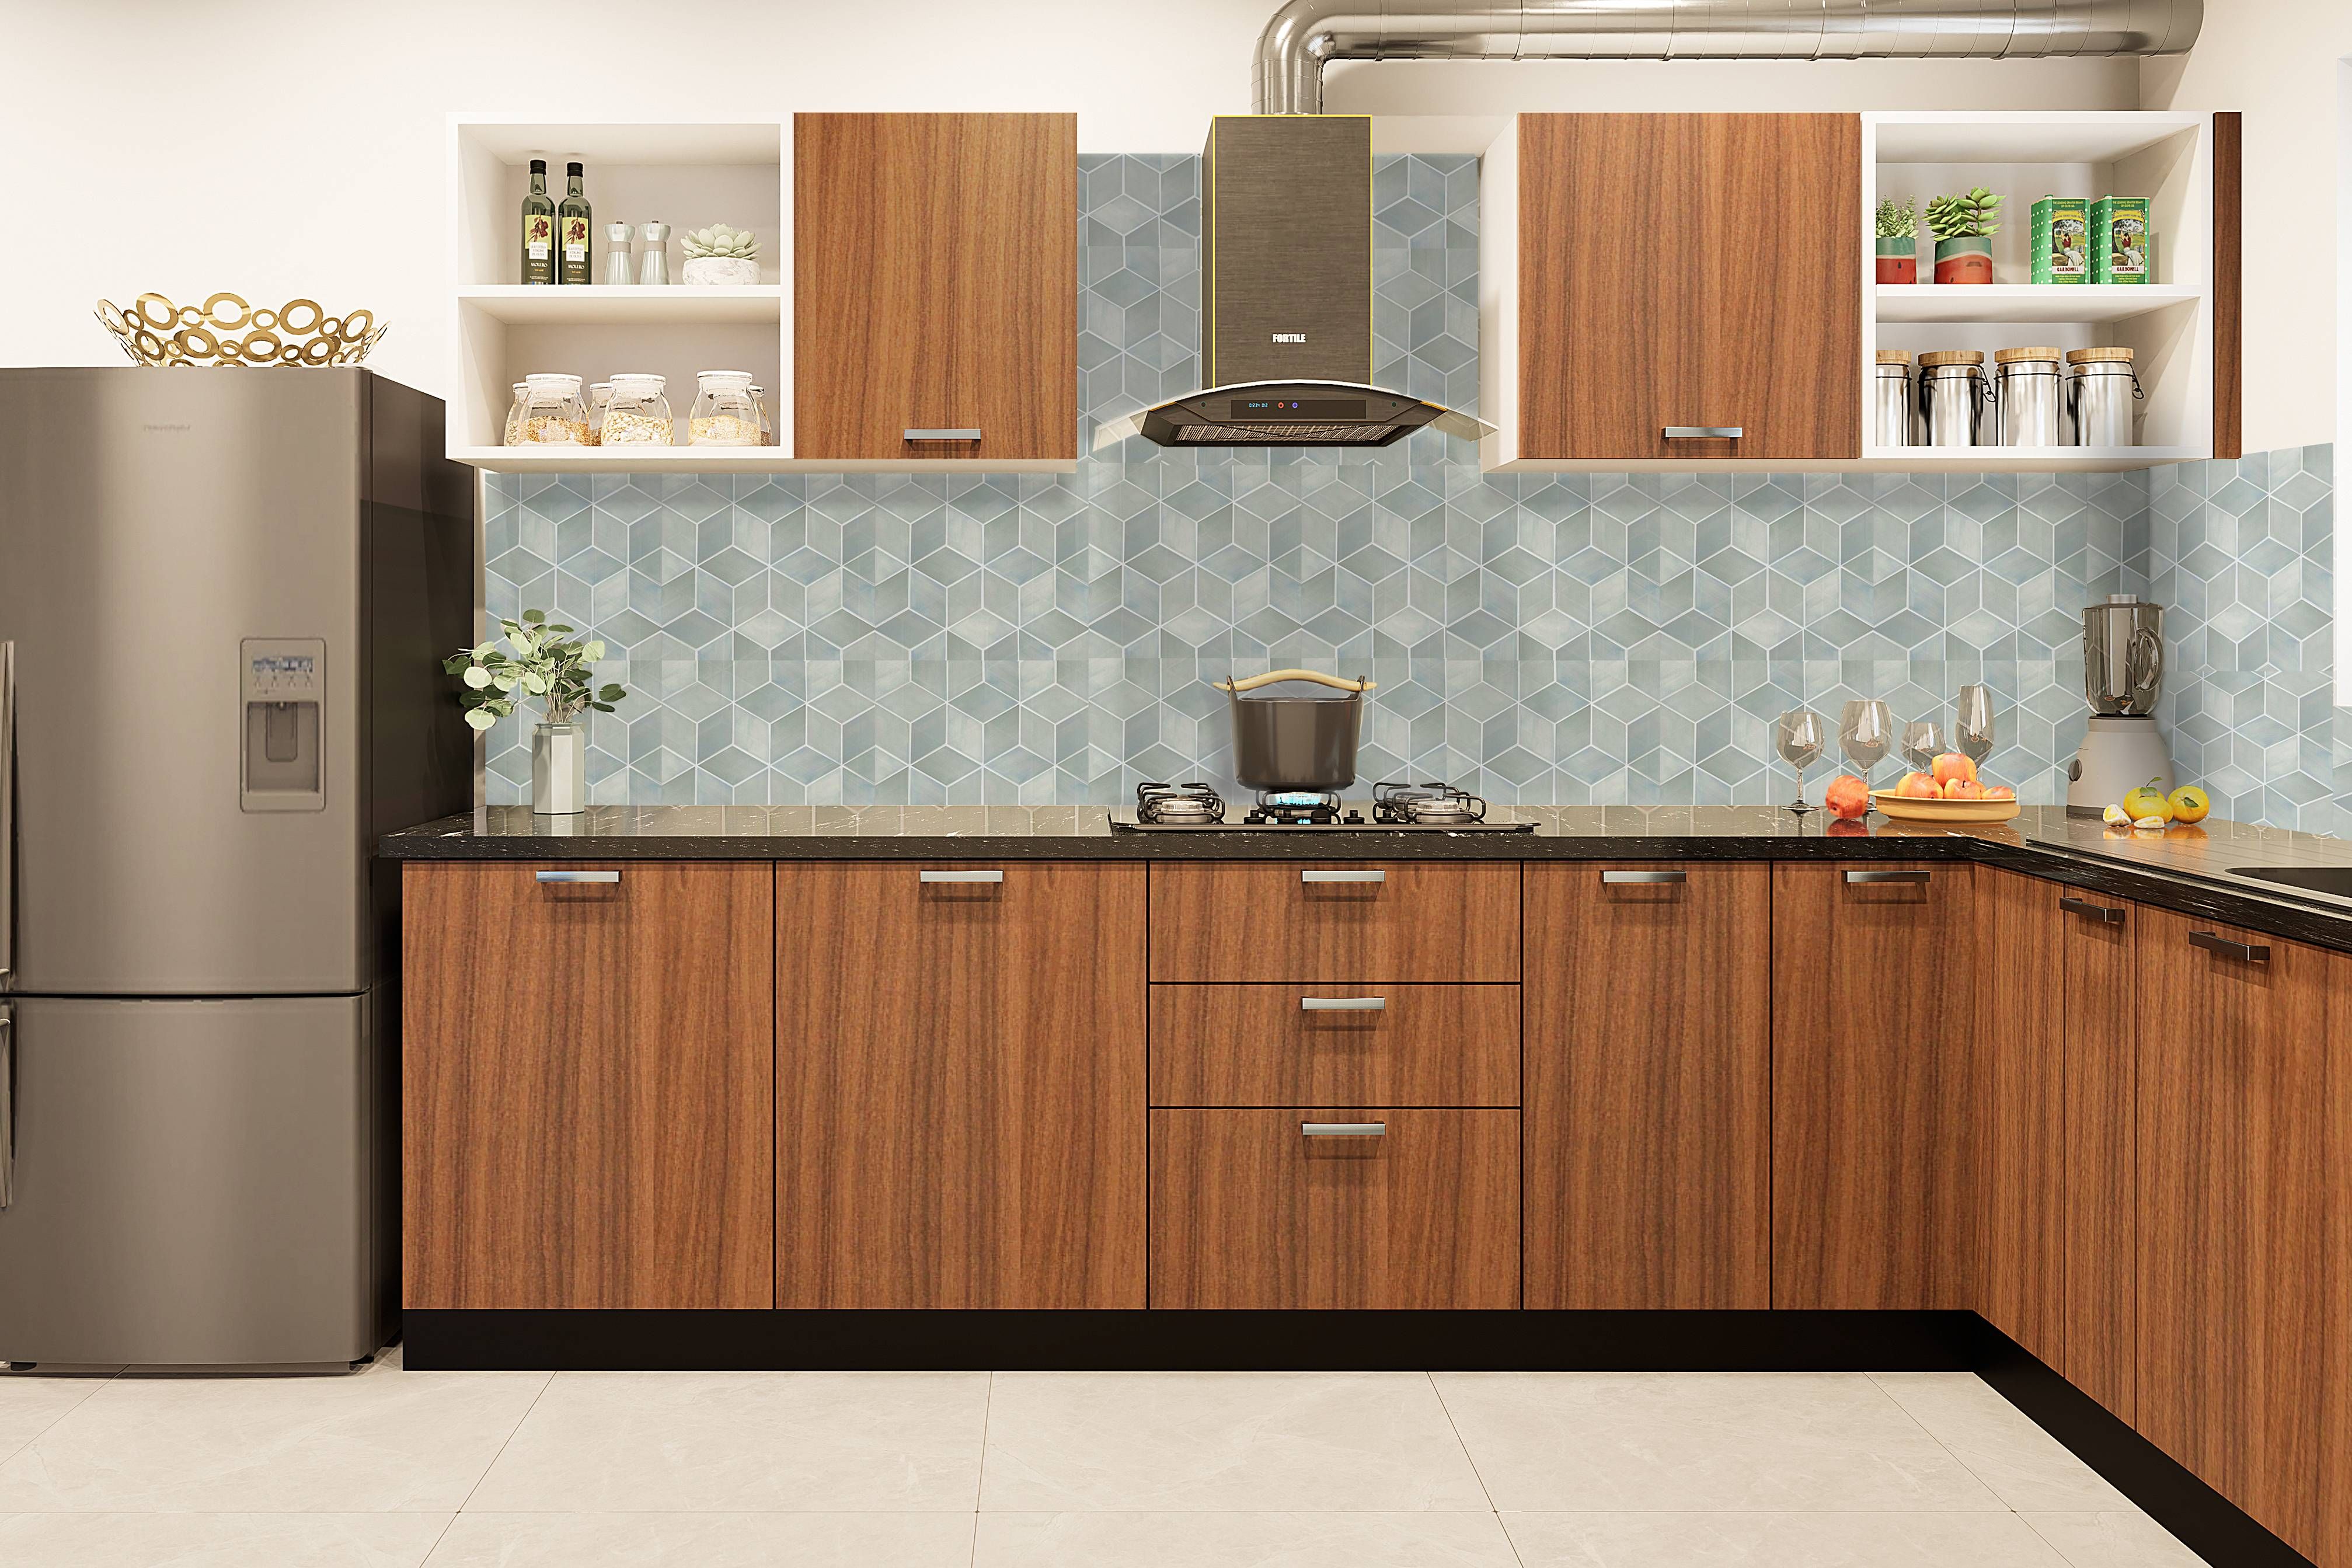 Contemporary Parallel Kitchen Design With Wooden Cabinets